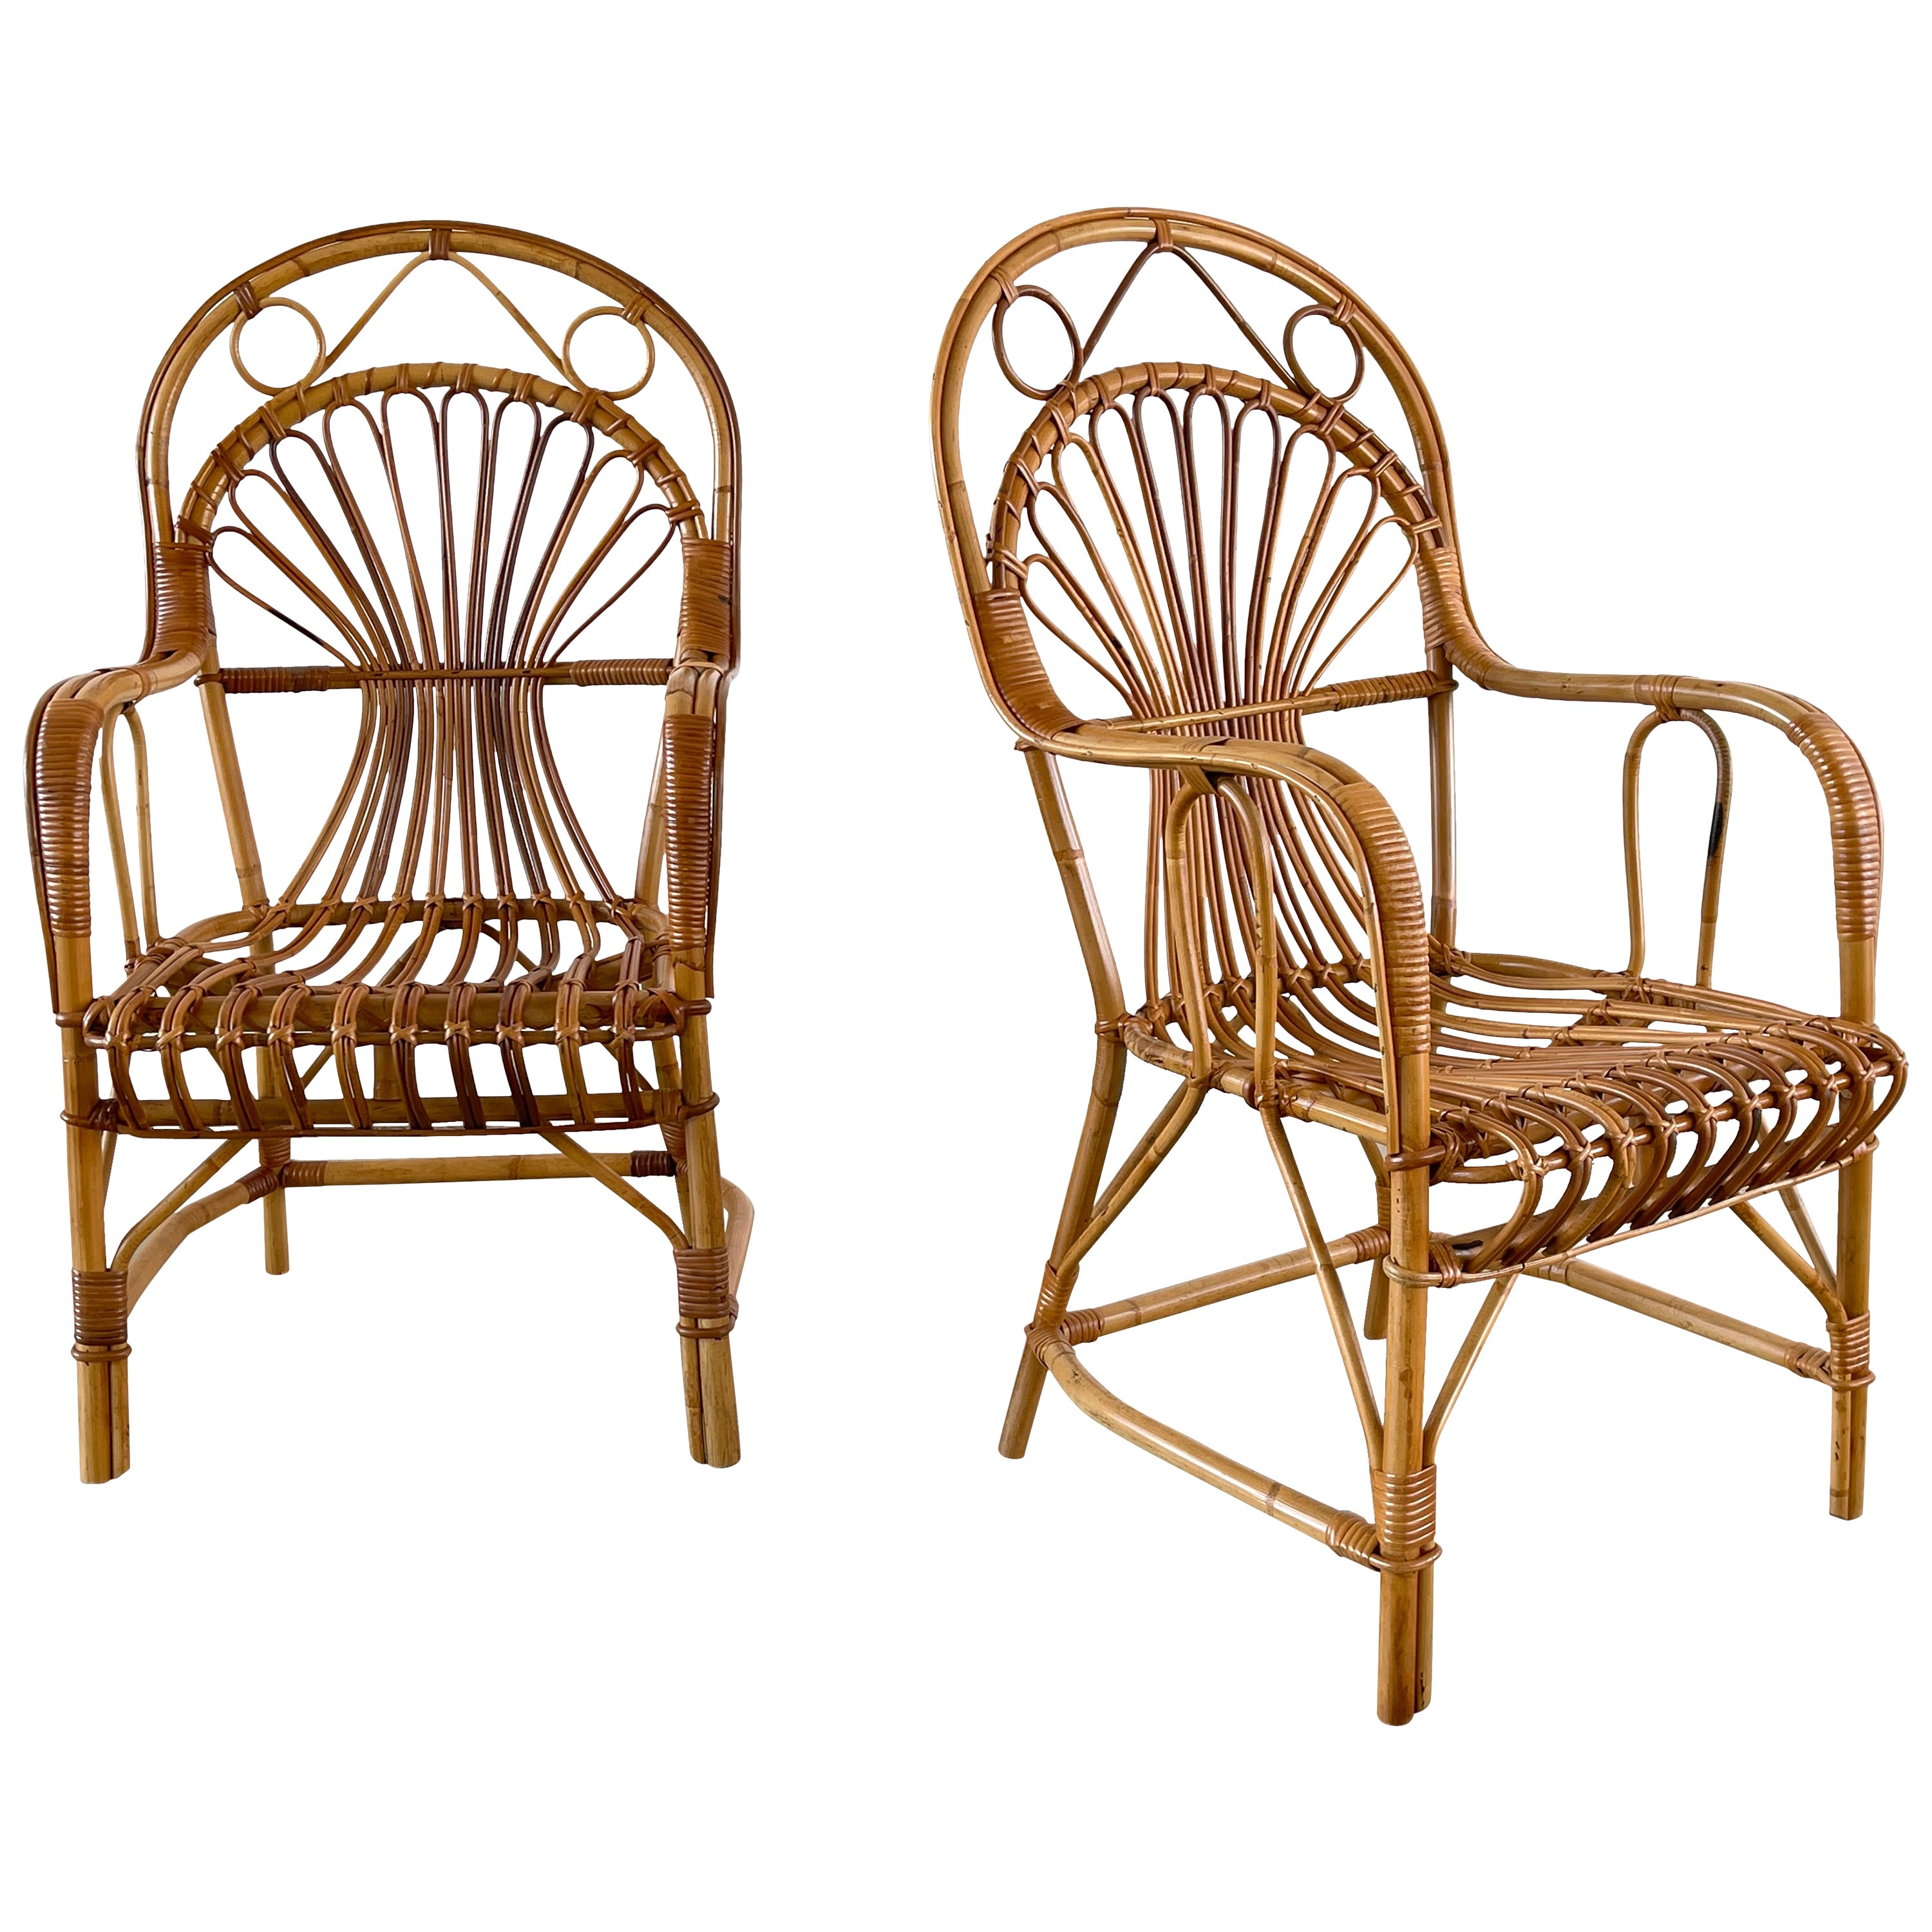 Italian Bamboo Chairs For Sale